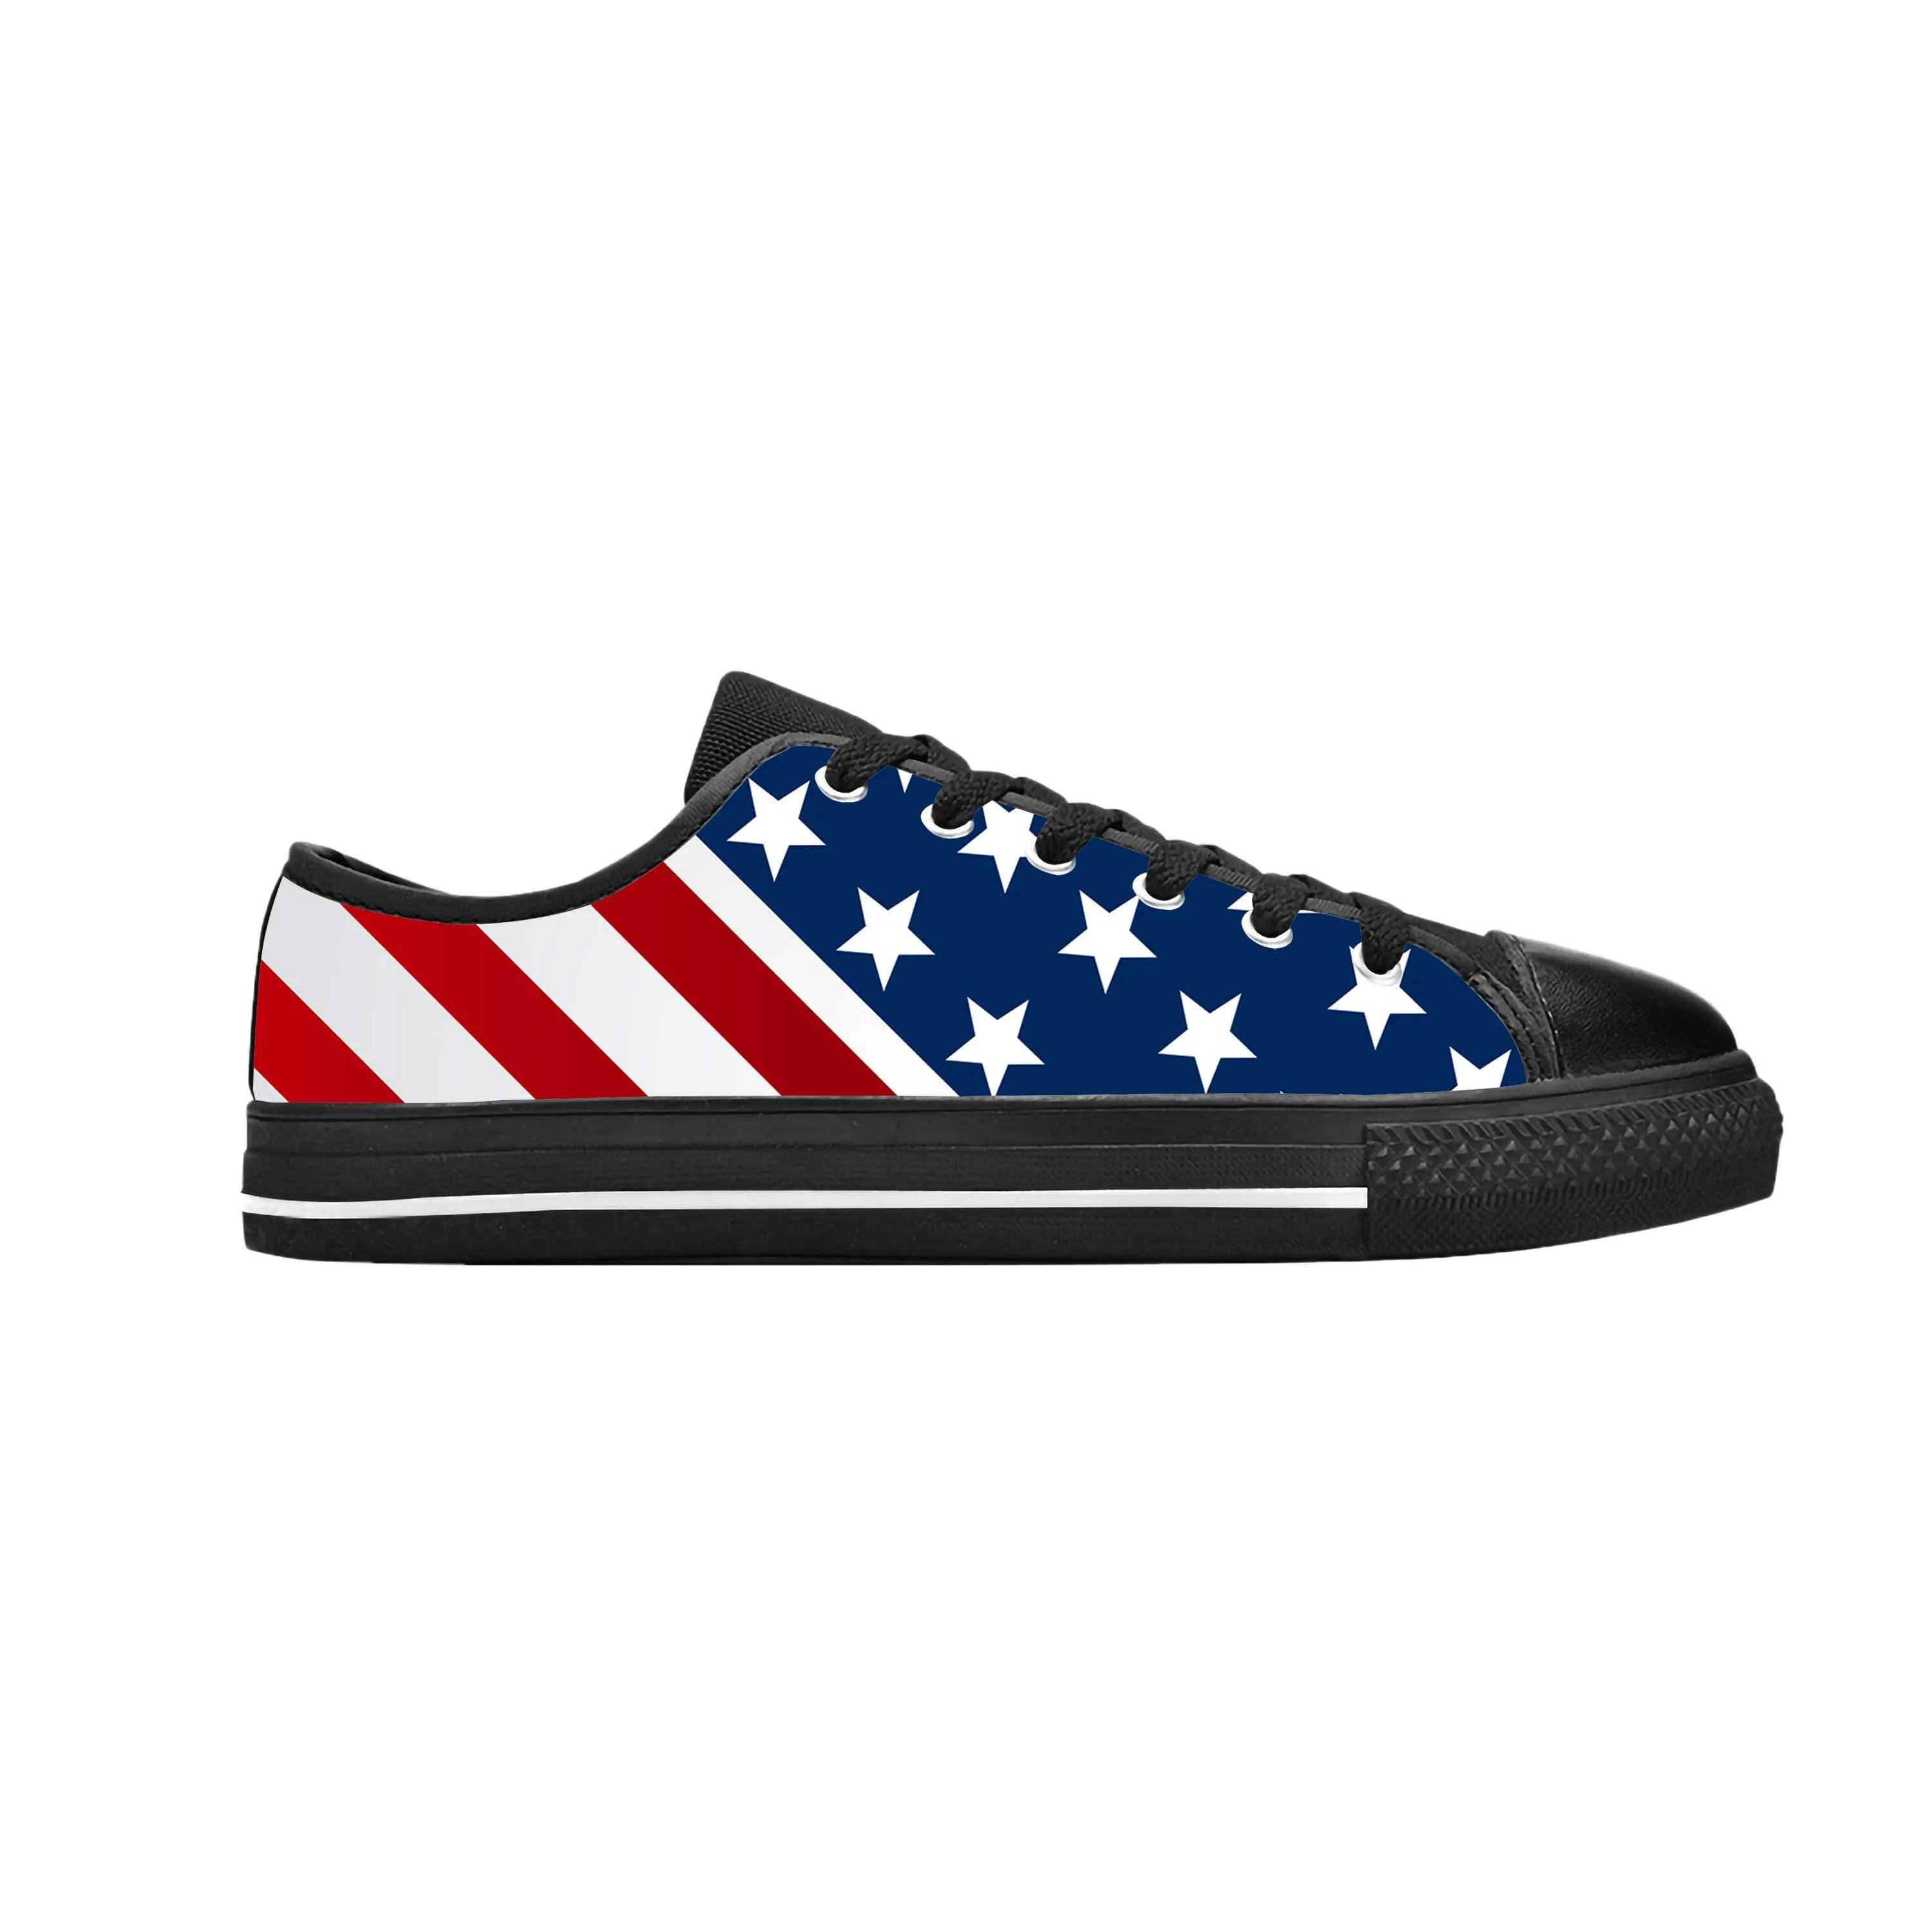 

United States USA American Flag Stars Stripes Cool Casual Cloth Shoes Low Top Comfortable Breathable 3D Print Men Women Sneakers